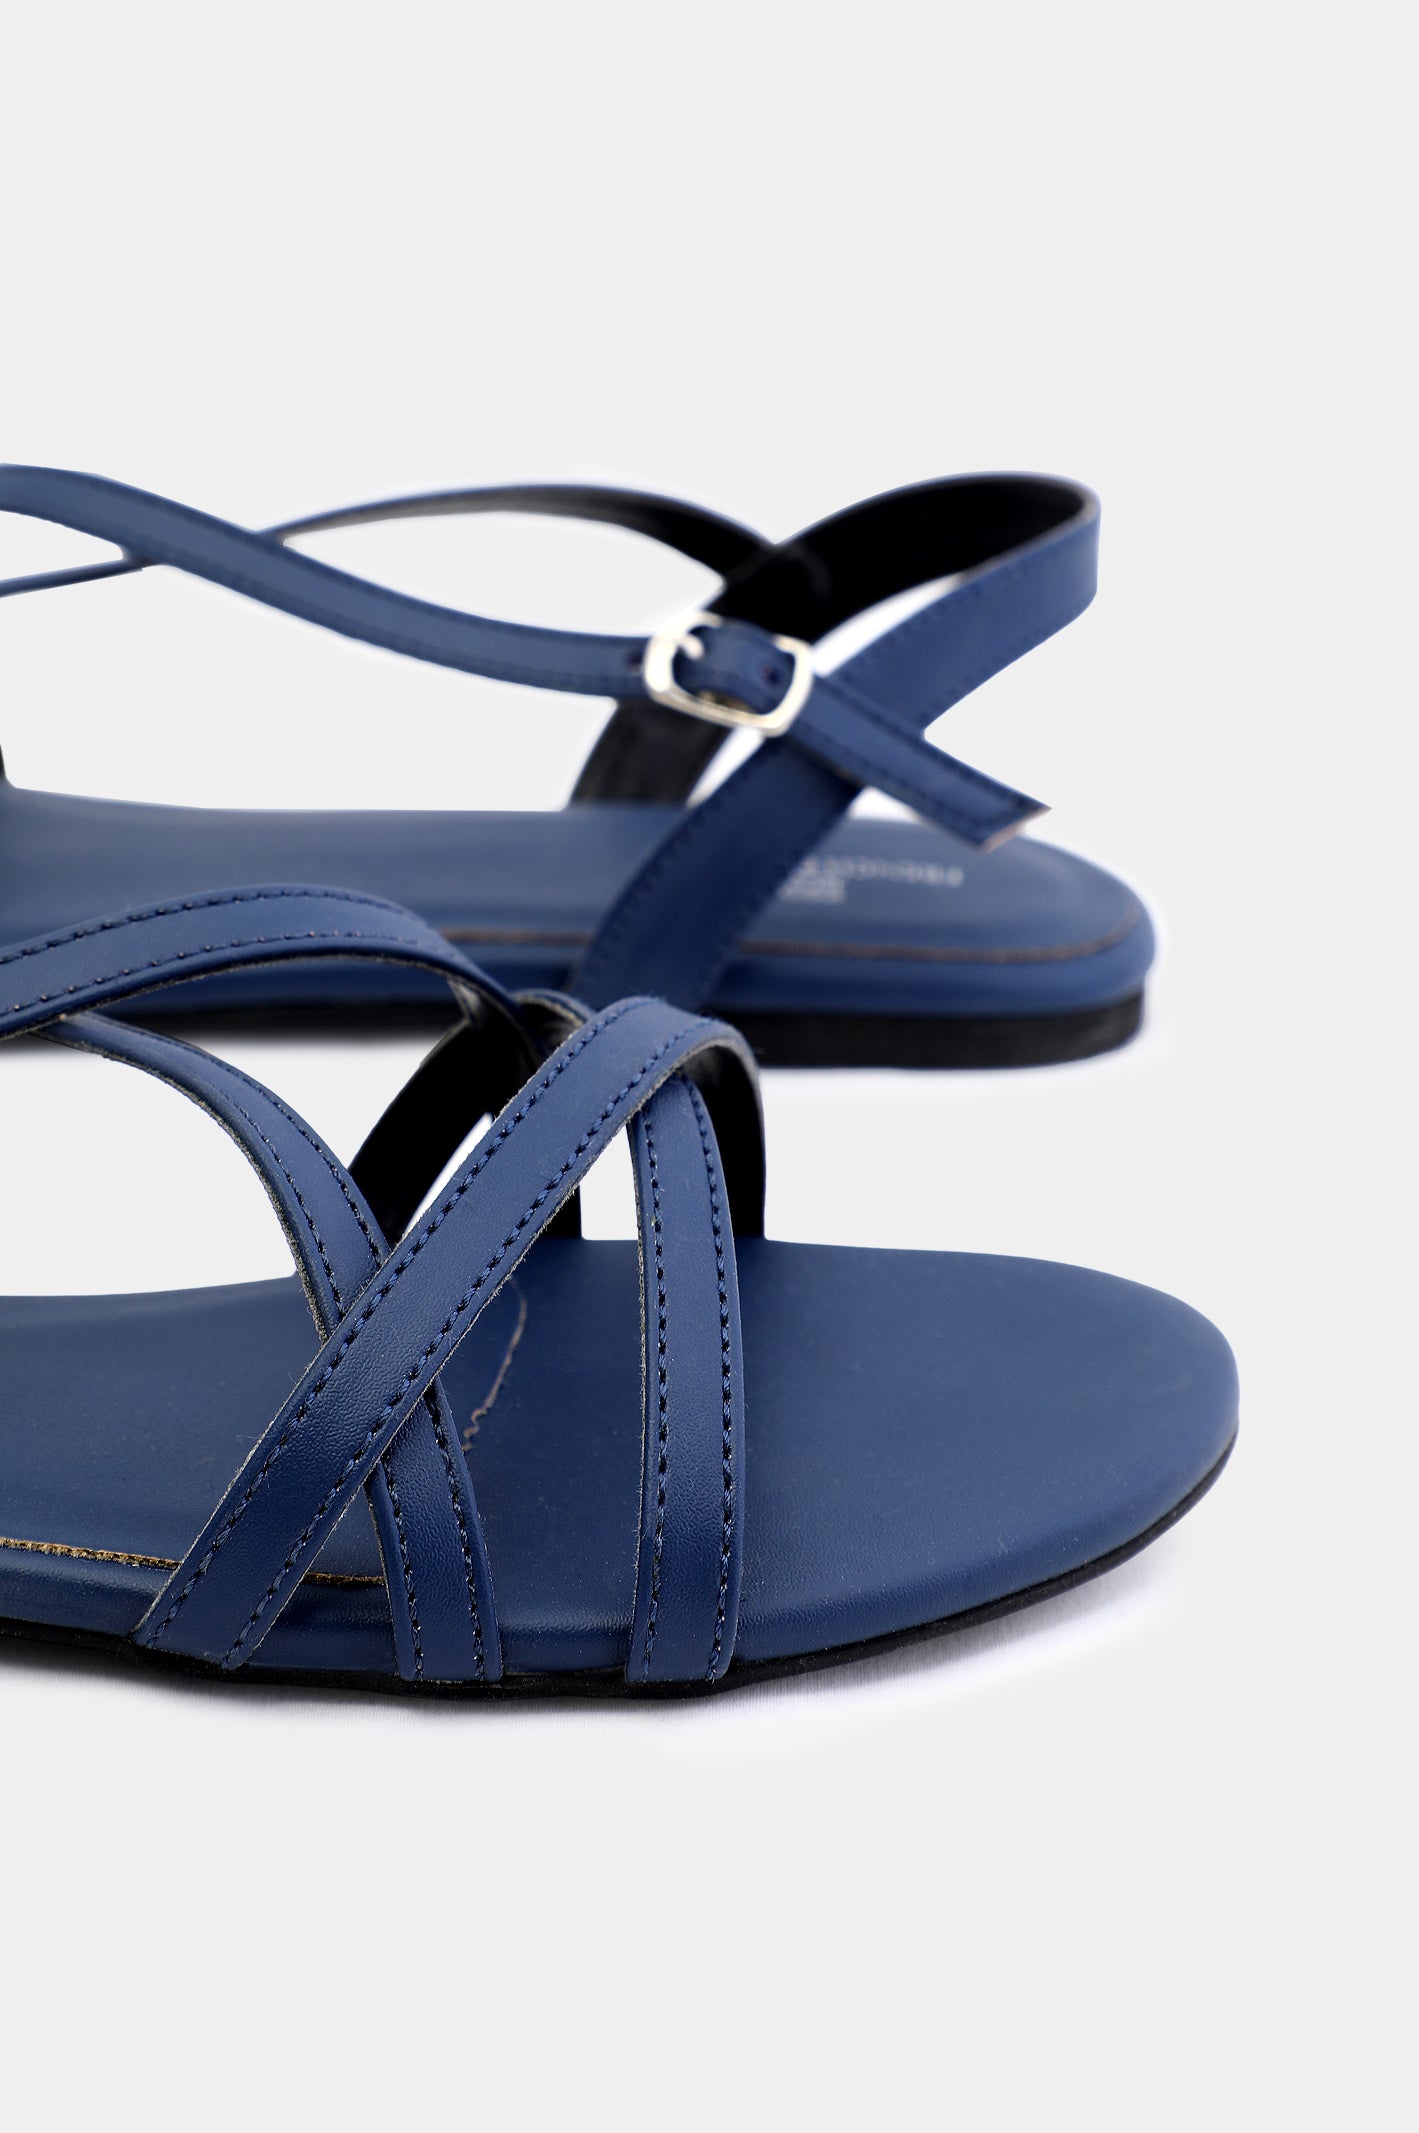 Ladies Formal Sandals From Diners